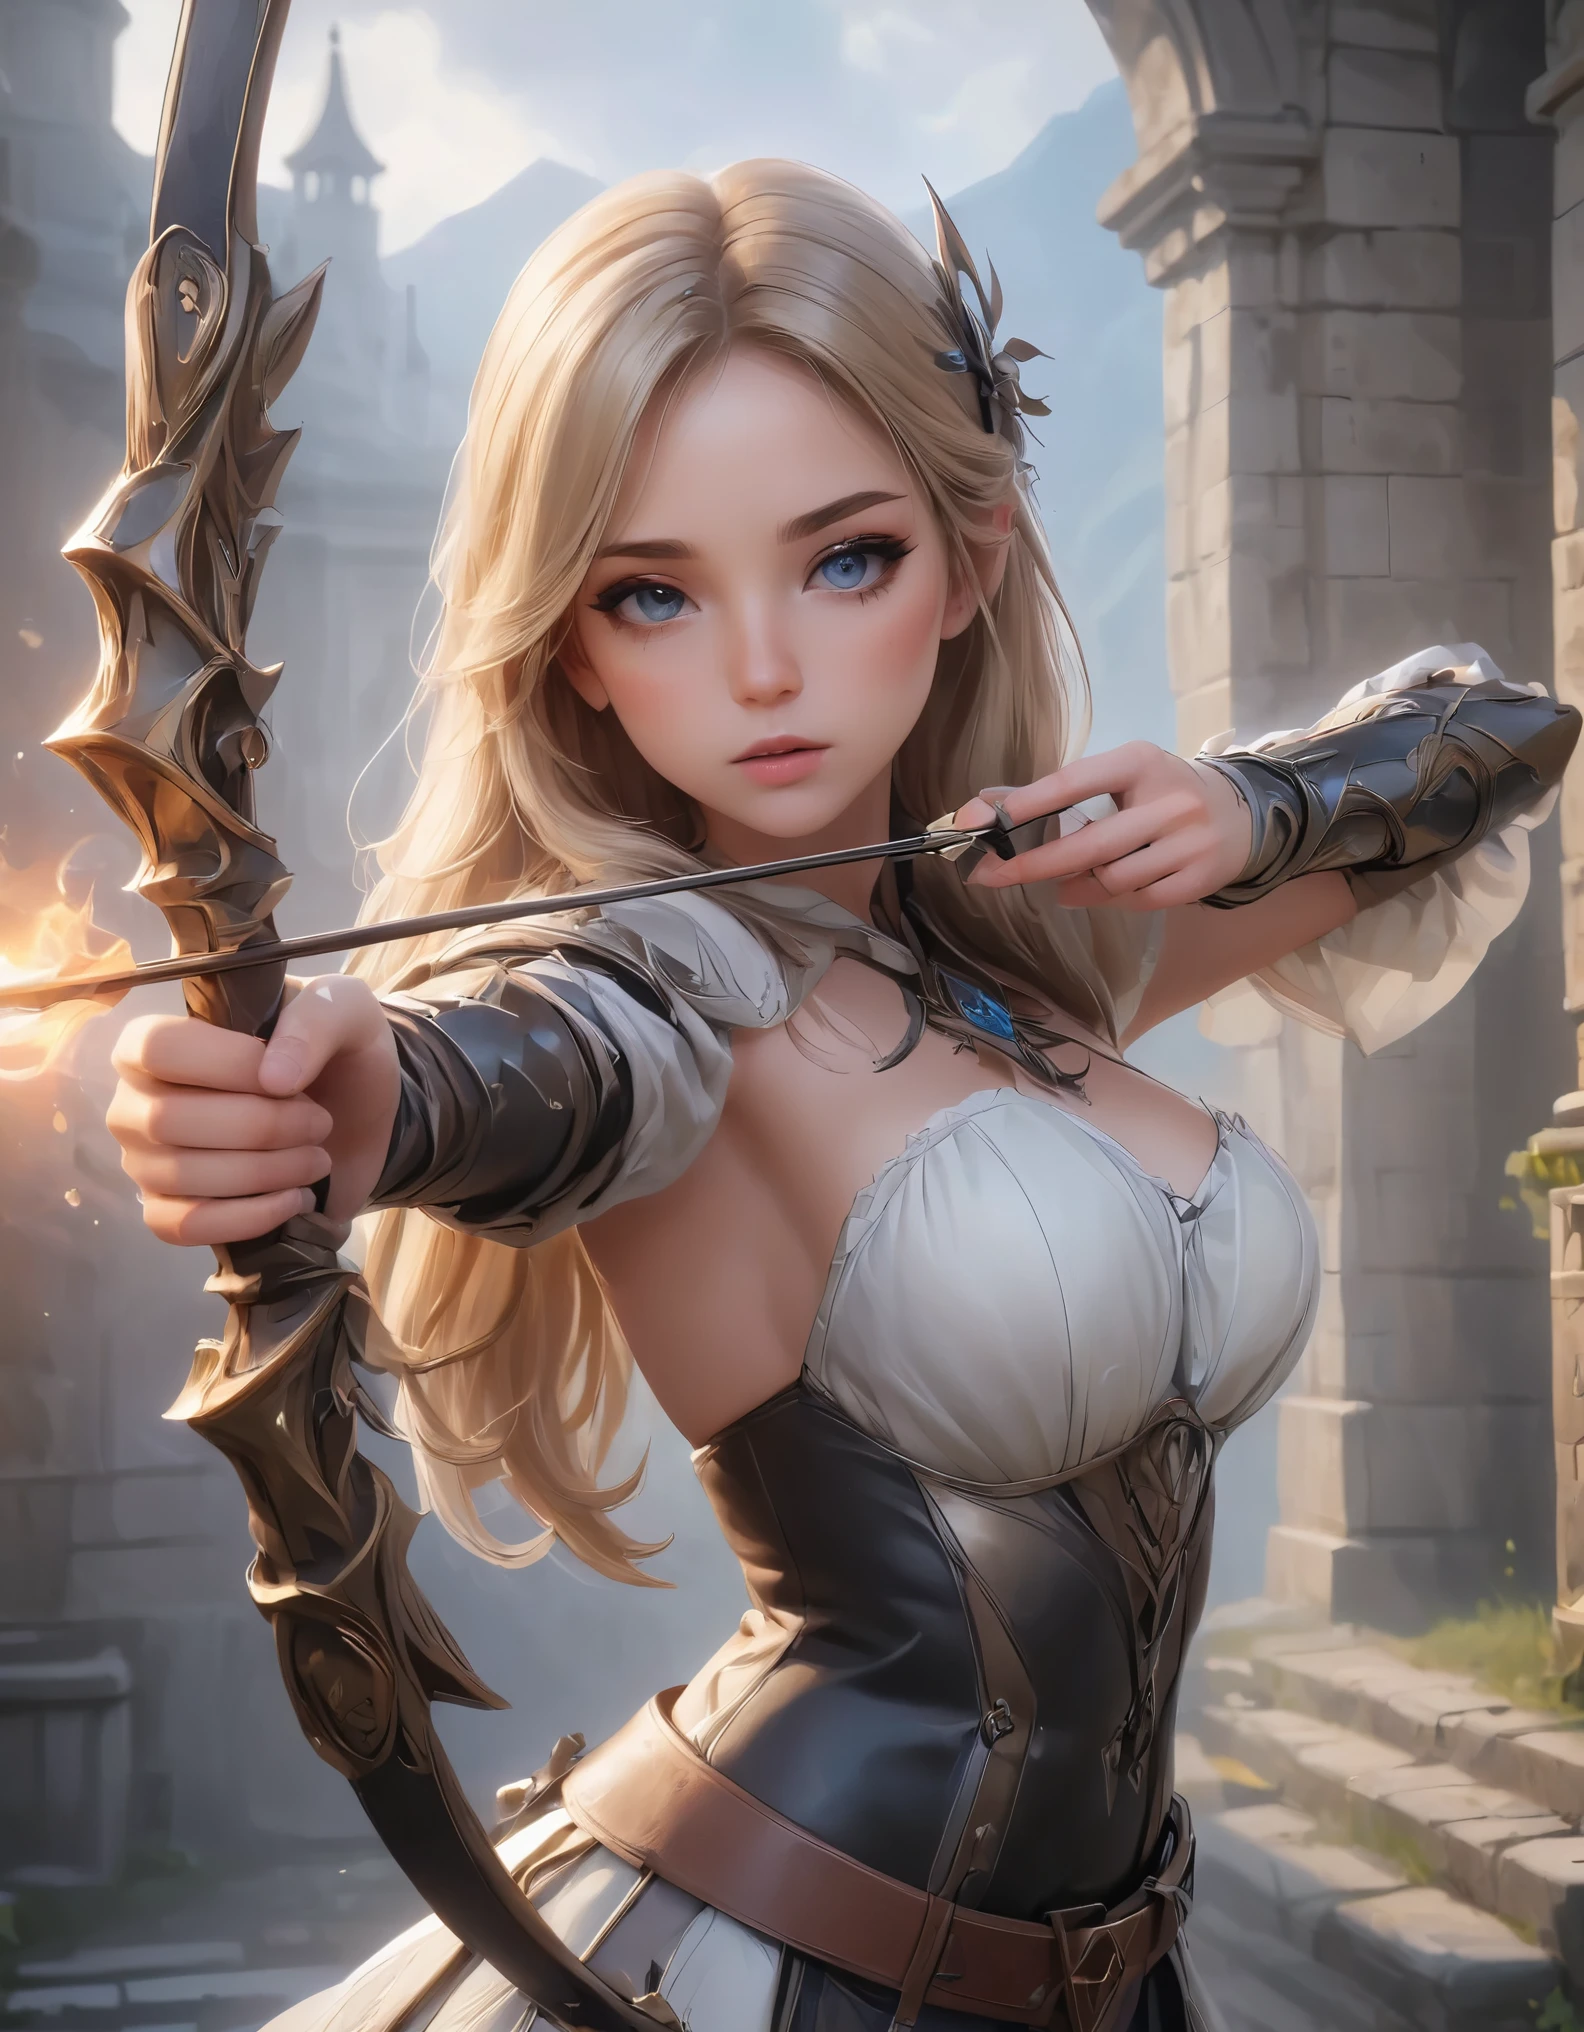 Woman shooting a bow, Large Bow and Arrow, Take aim, longbow , Aiming with a bow, Delicate expression, Perfect hands(Five fingers), Beautiful Hair, Shiny Hair, Beautiful Skin, Detailed face and eyes, Glossy Lips, Medieval Fantasy, Dramatic lighting, Film composition, Dramatic pose, Medieval Armor, Intricate details, Dramatic atmosphere, Moody lighting, an epic fantasy, Very detailed, cinematic, dramatic, powerful, strong, (Highest quality:1.2, Very detailed, Latest, Vibrant, Ultra-high resolution, High Contrast, masterpiece:1.2, Highest quality, Best aesthetics),